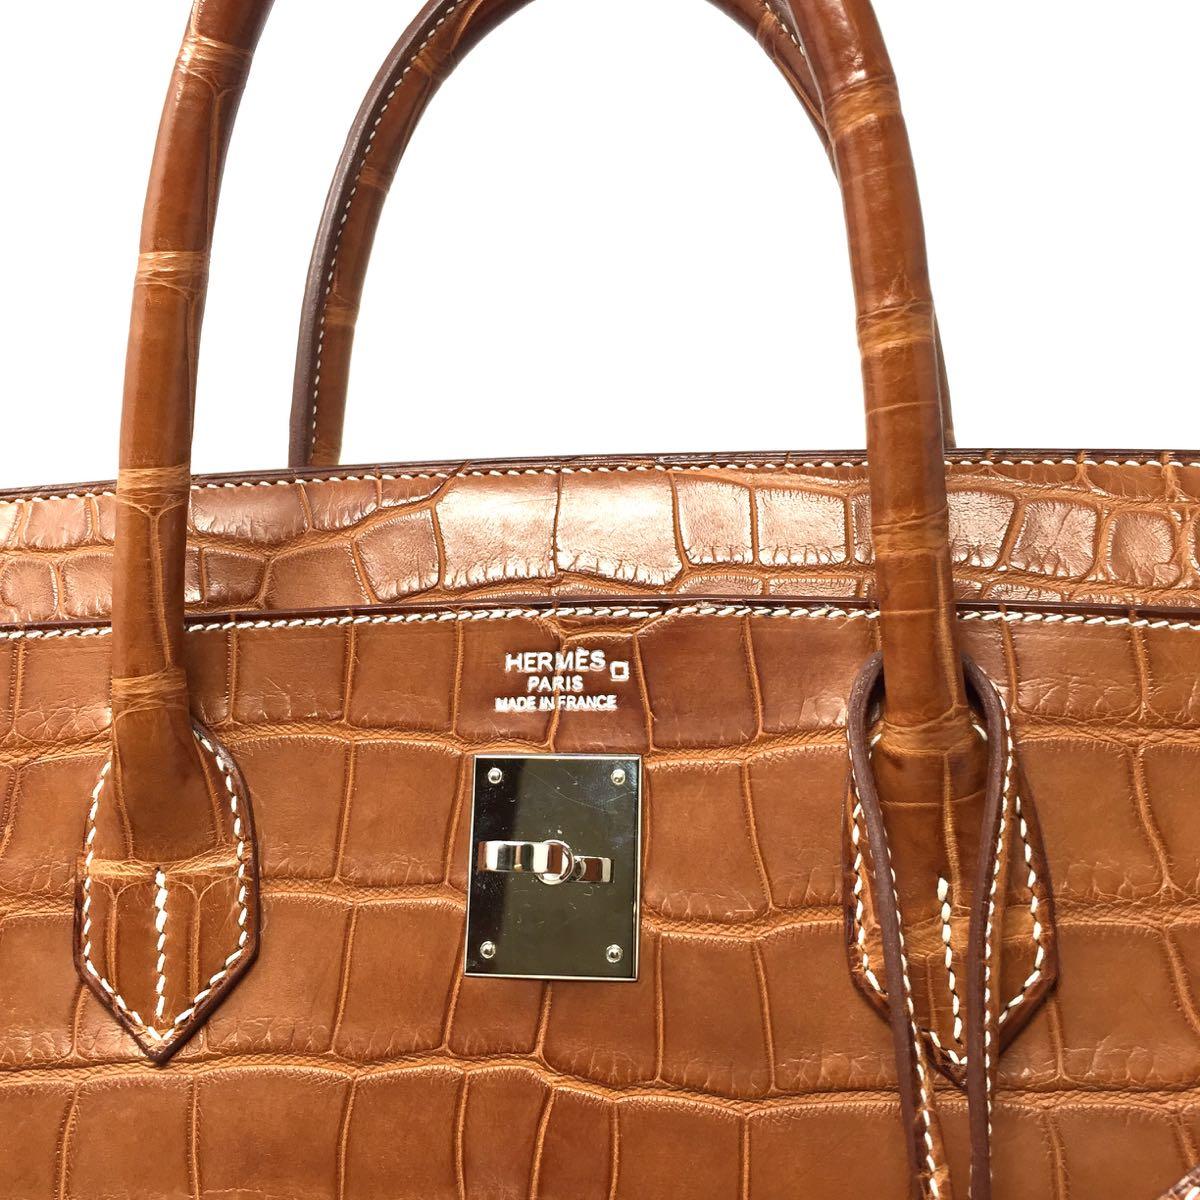 Hermes Paris Sac Birkin Bag 40 Gold Matte Alligator Leather.
This Birkin dimensions has become a must in both the women's and men's world. 
The hdw palladium is a perfect contrast between elegance and beauty.
The conditions are Excellent , It's